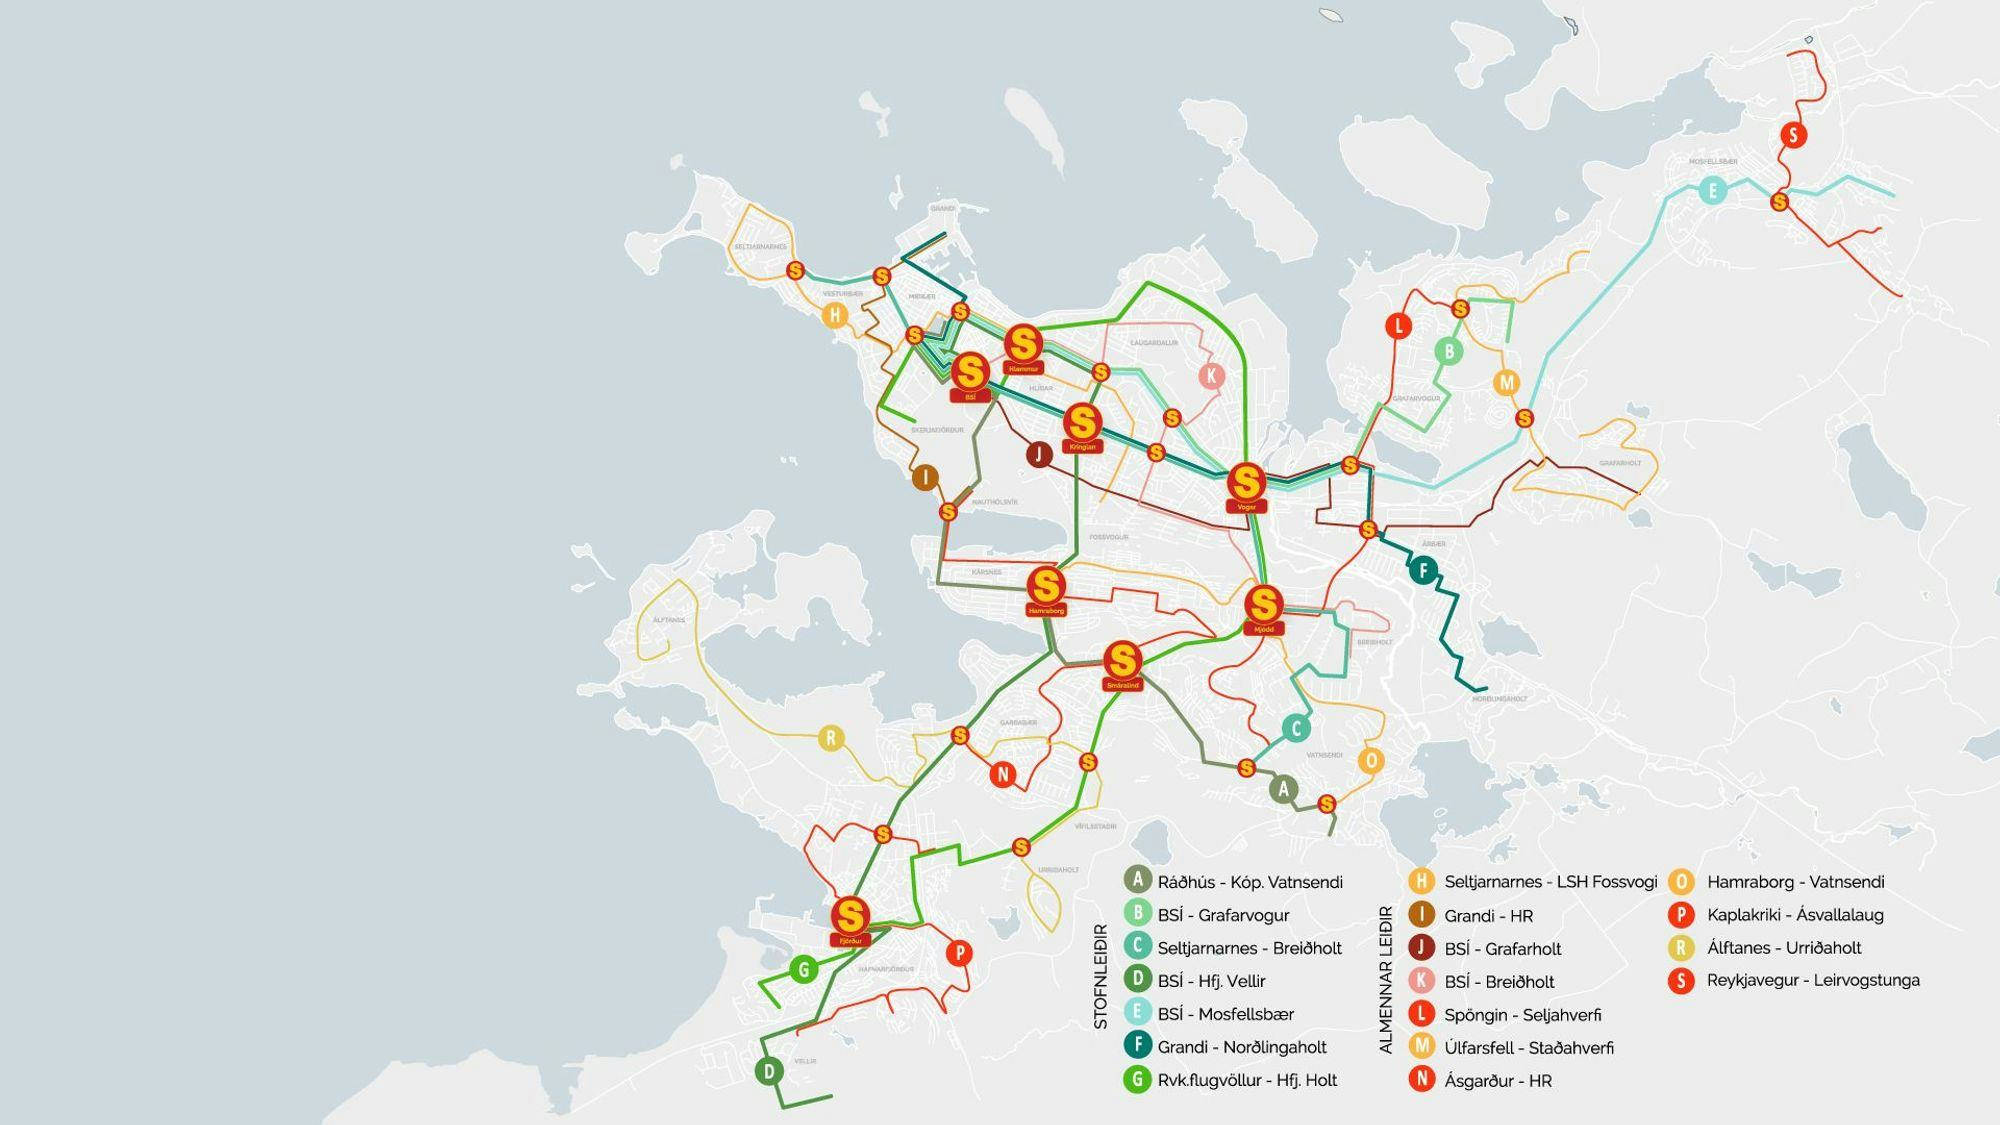 A map with various symbols and lines indicating routes